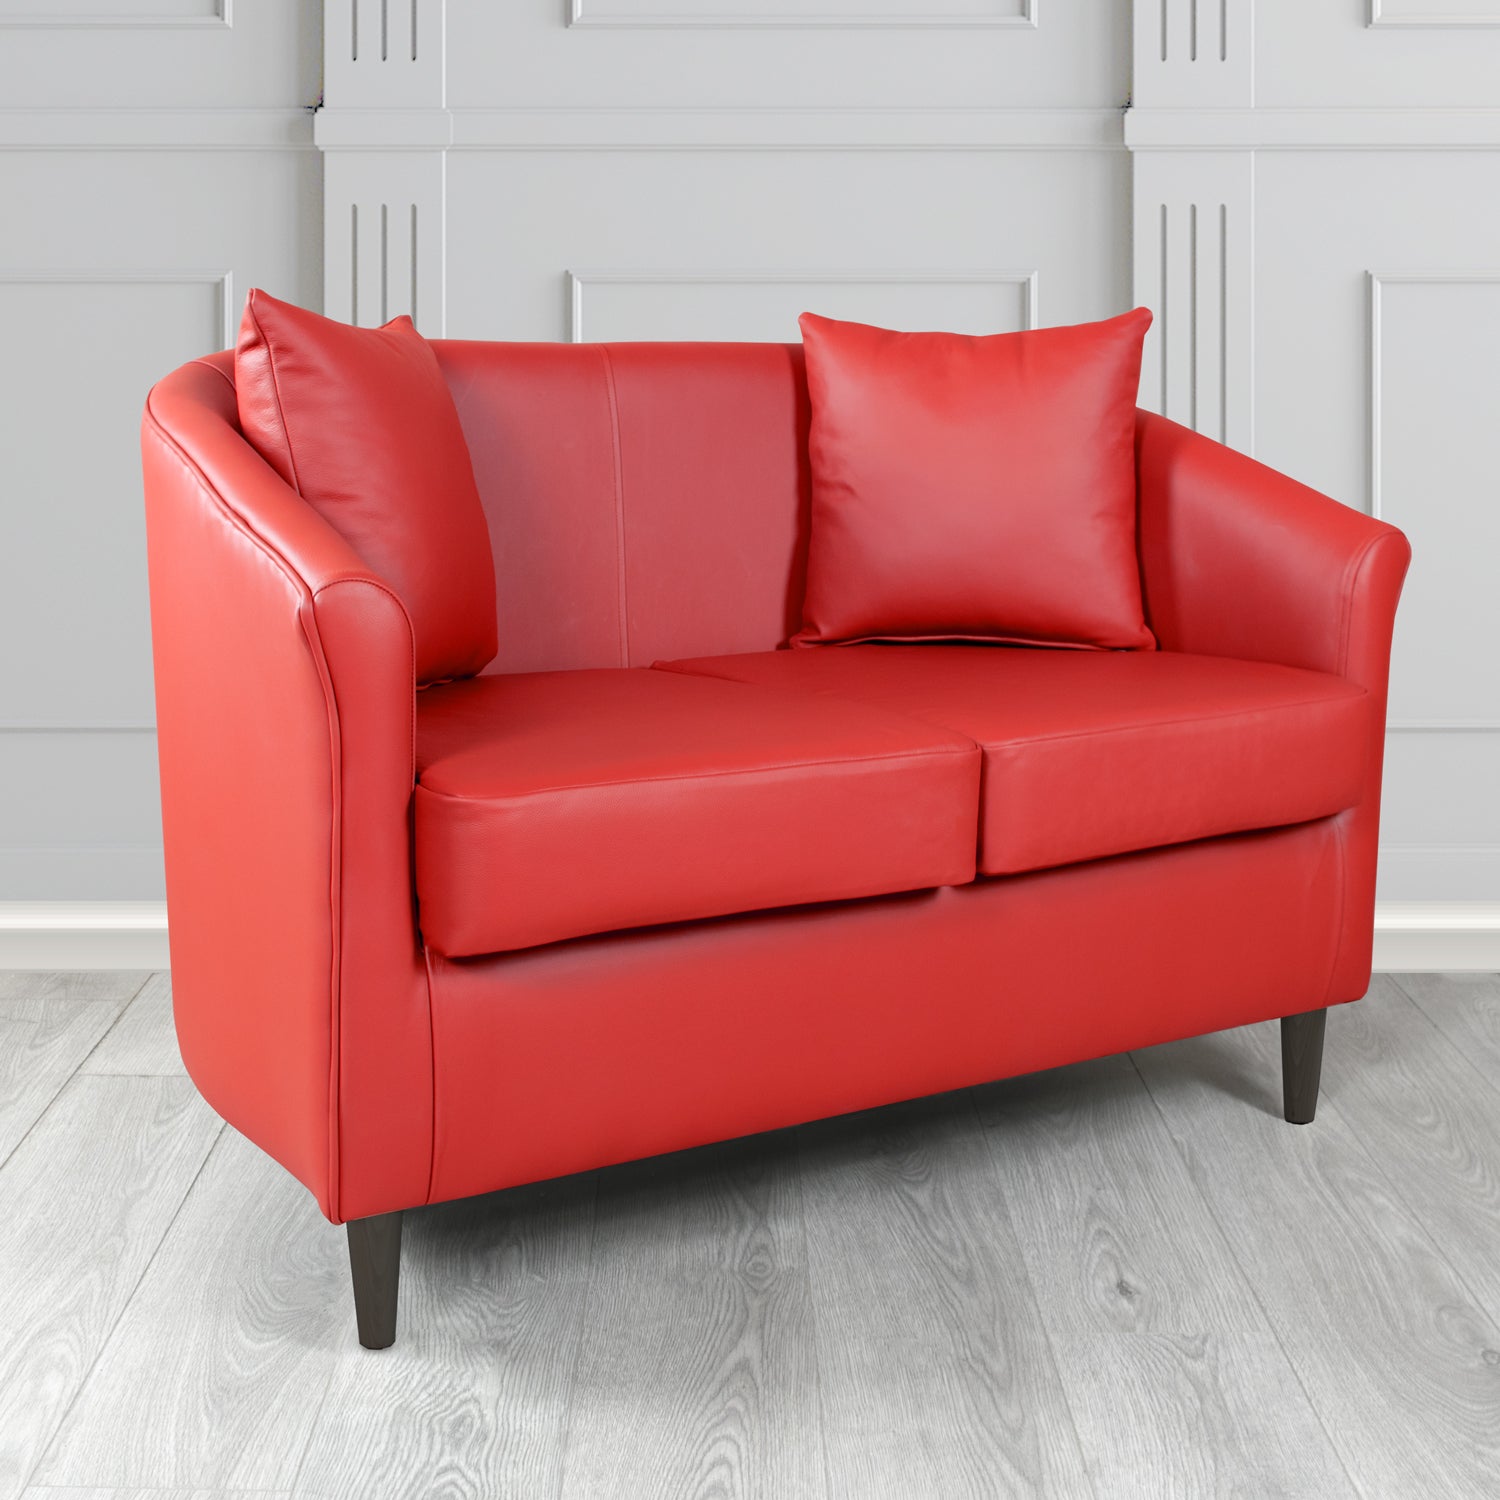 St Tropez Shelly Poppy Crib 5 Genuine Leather 2 Seater Tub Sofa with Scatter Cushions - The Tub Chair Shop